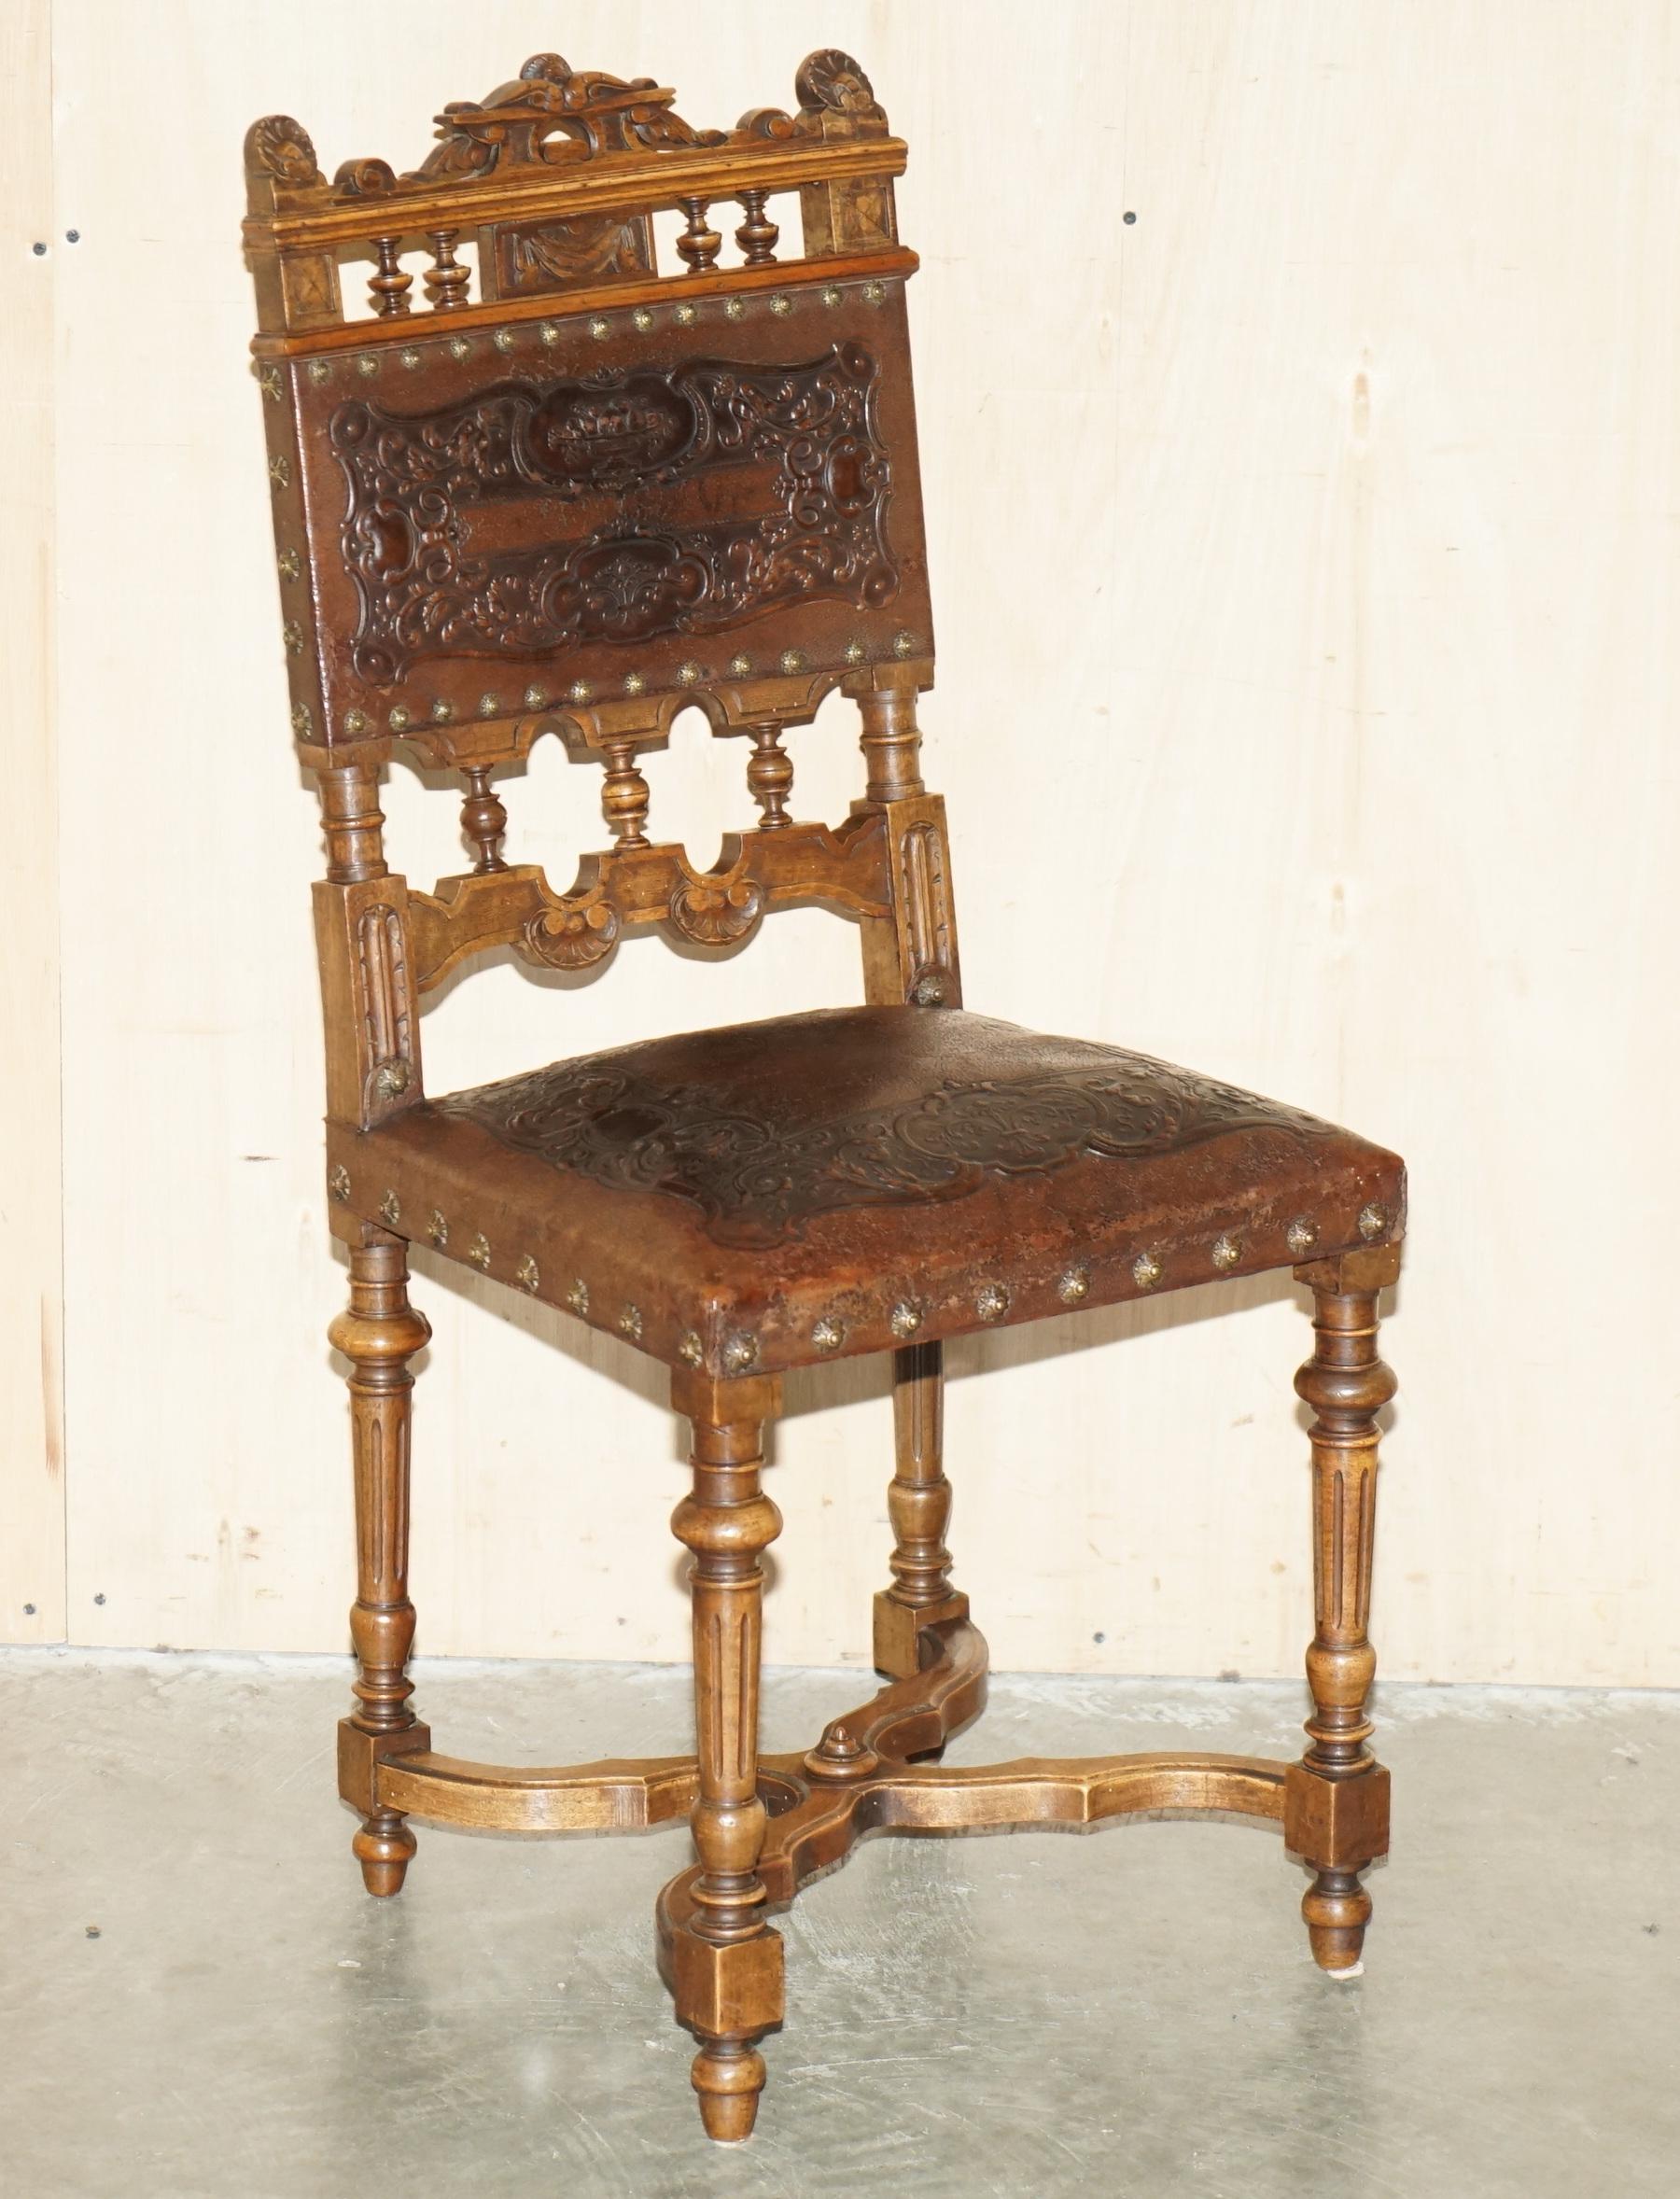 Royal House Antiques

Royal House Antiques is delighted to offer for sale this exceptional set of six French oak with Embossed brown leather upholstered Henry II circa 1880 dining chairs

Please note the delivery fee listed is just a guide, it